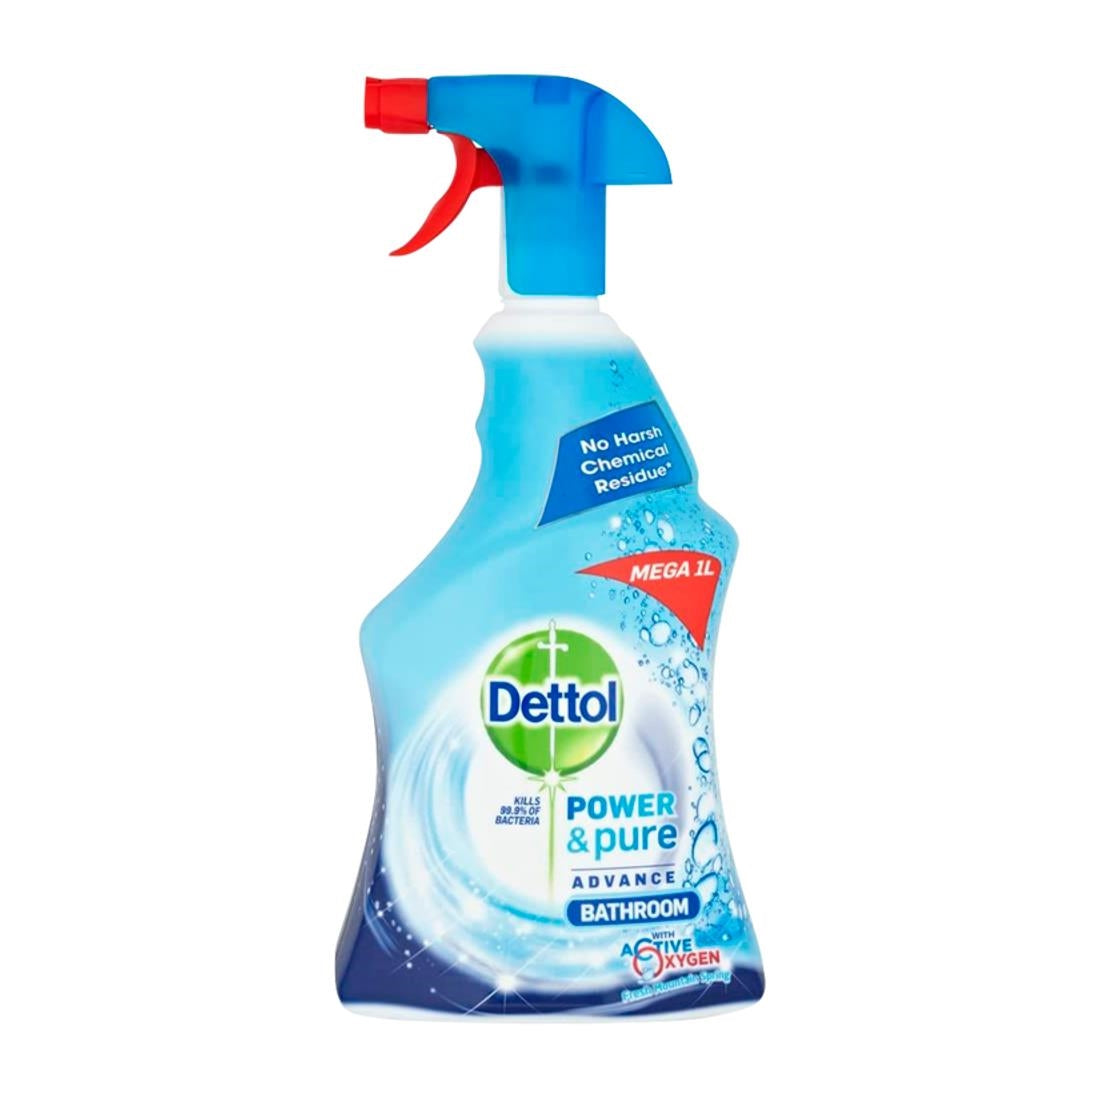 FT019 Dettol Power and Pure Advance Bathroom Cleaner Ready To Use 1Ltr JD Catering Equipment Solutions Ltd